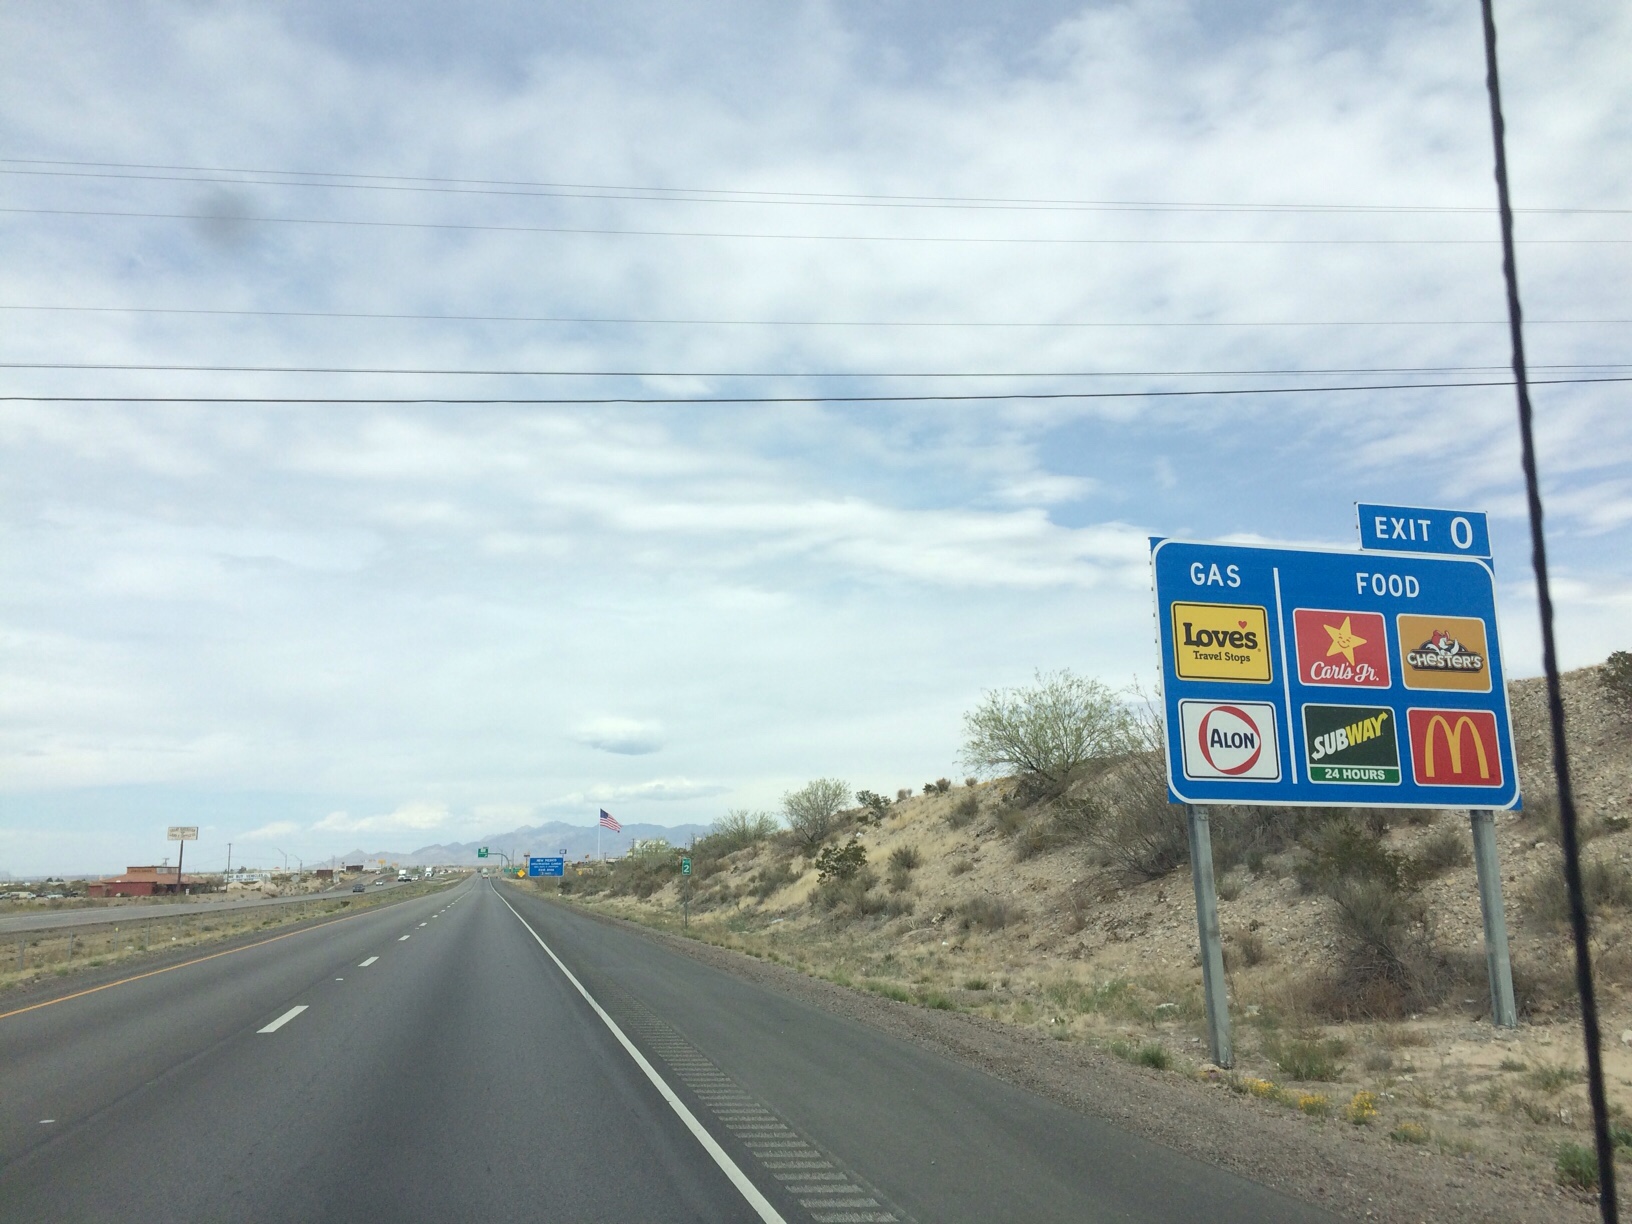 Typical American highway